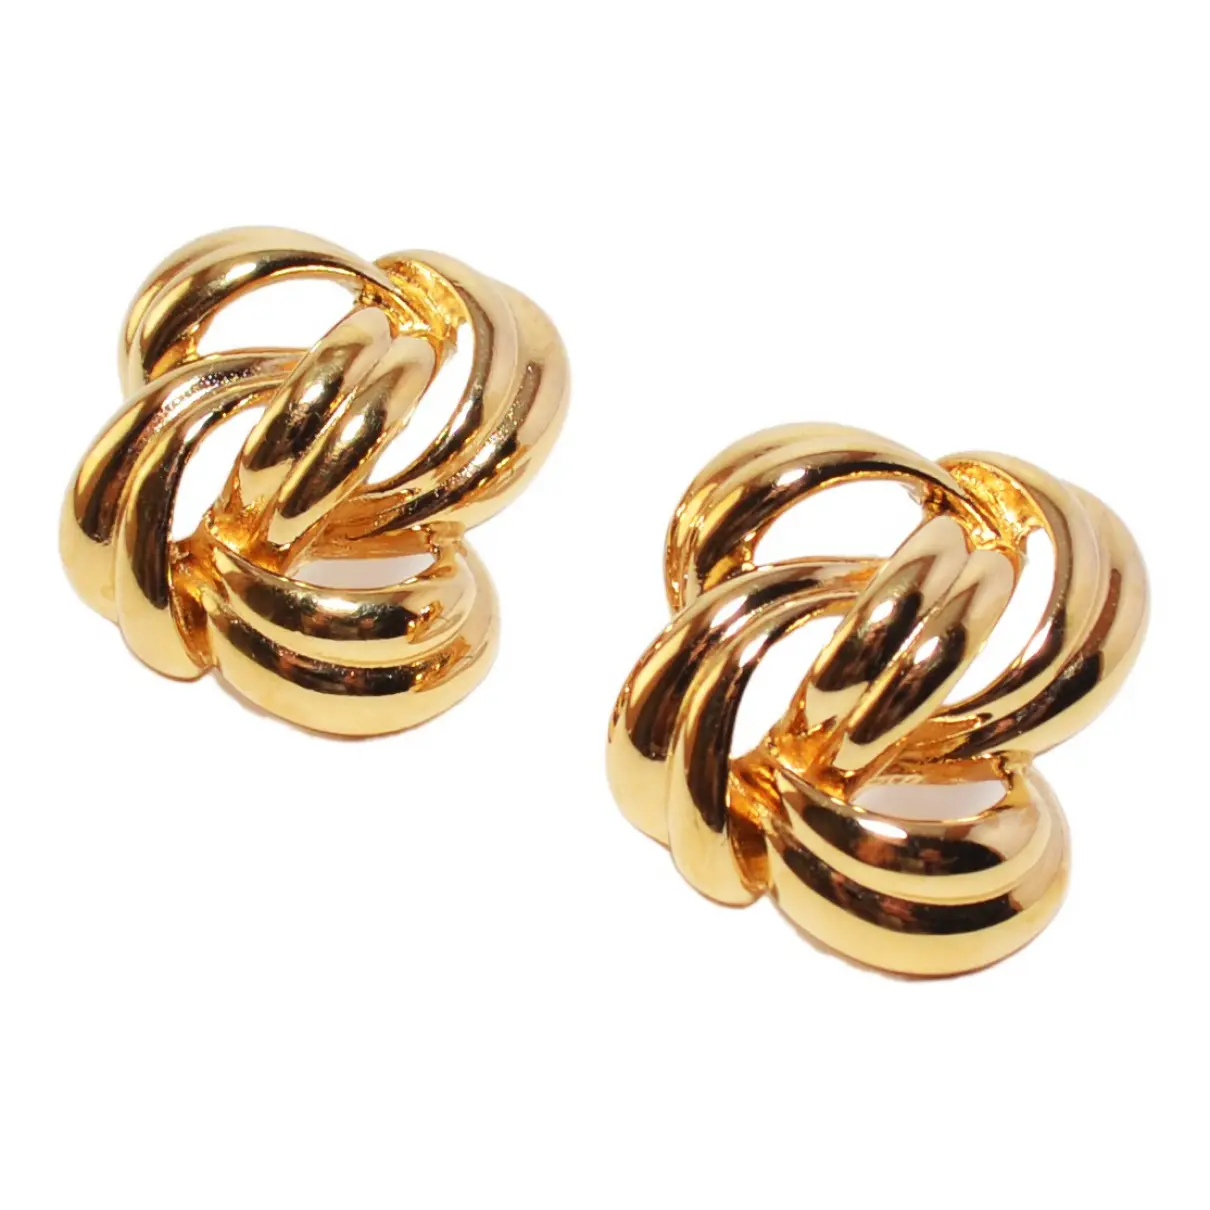 Earrings Givenchy - Vintage